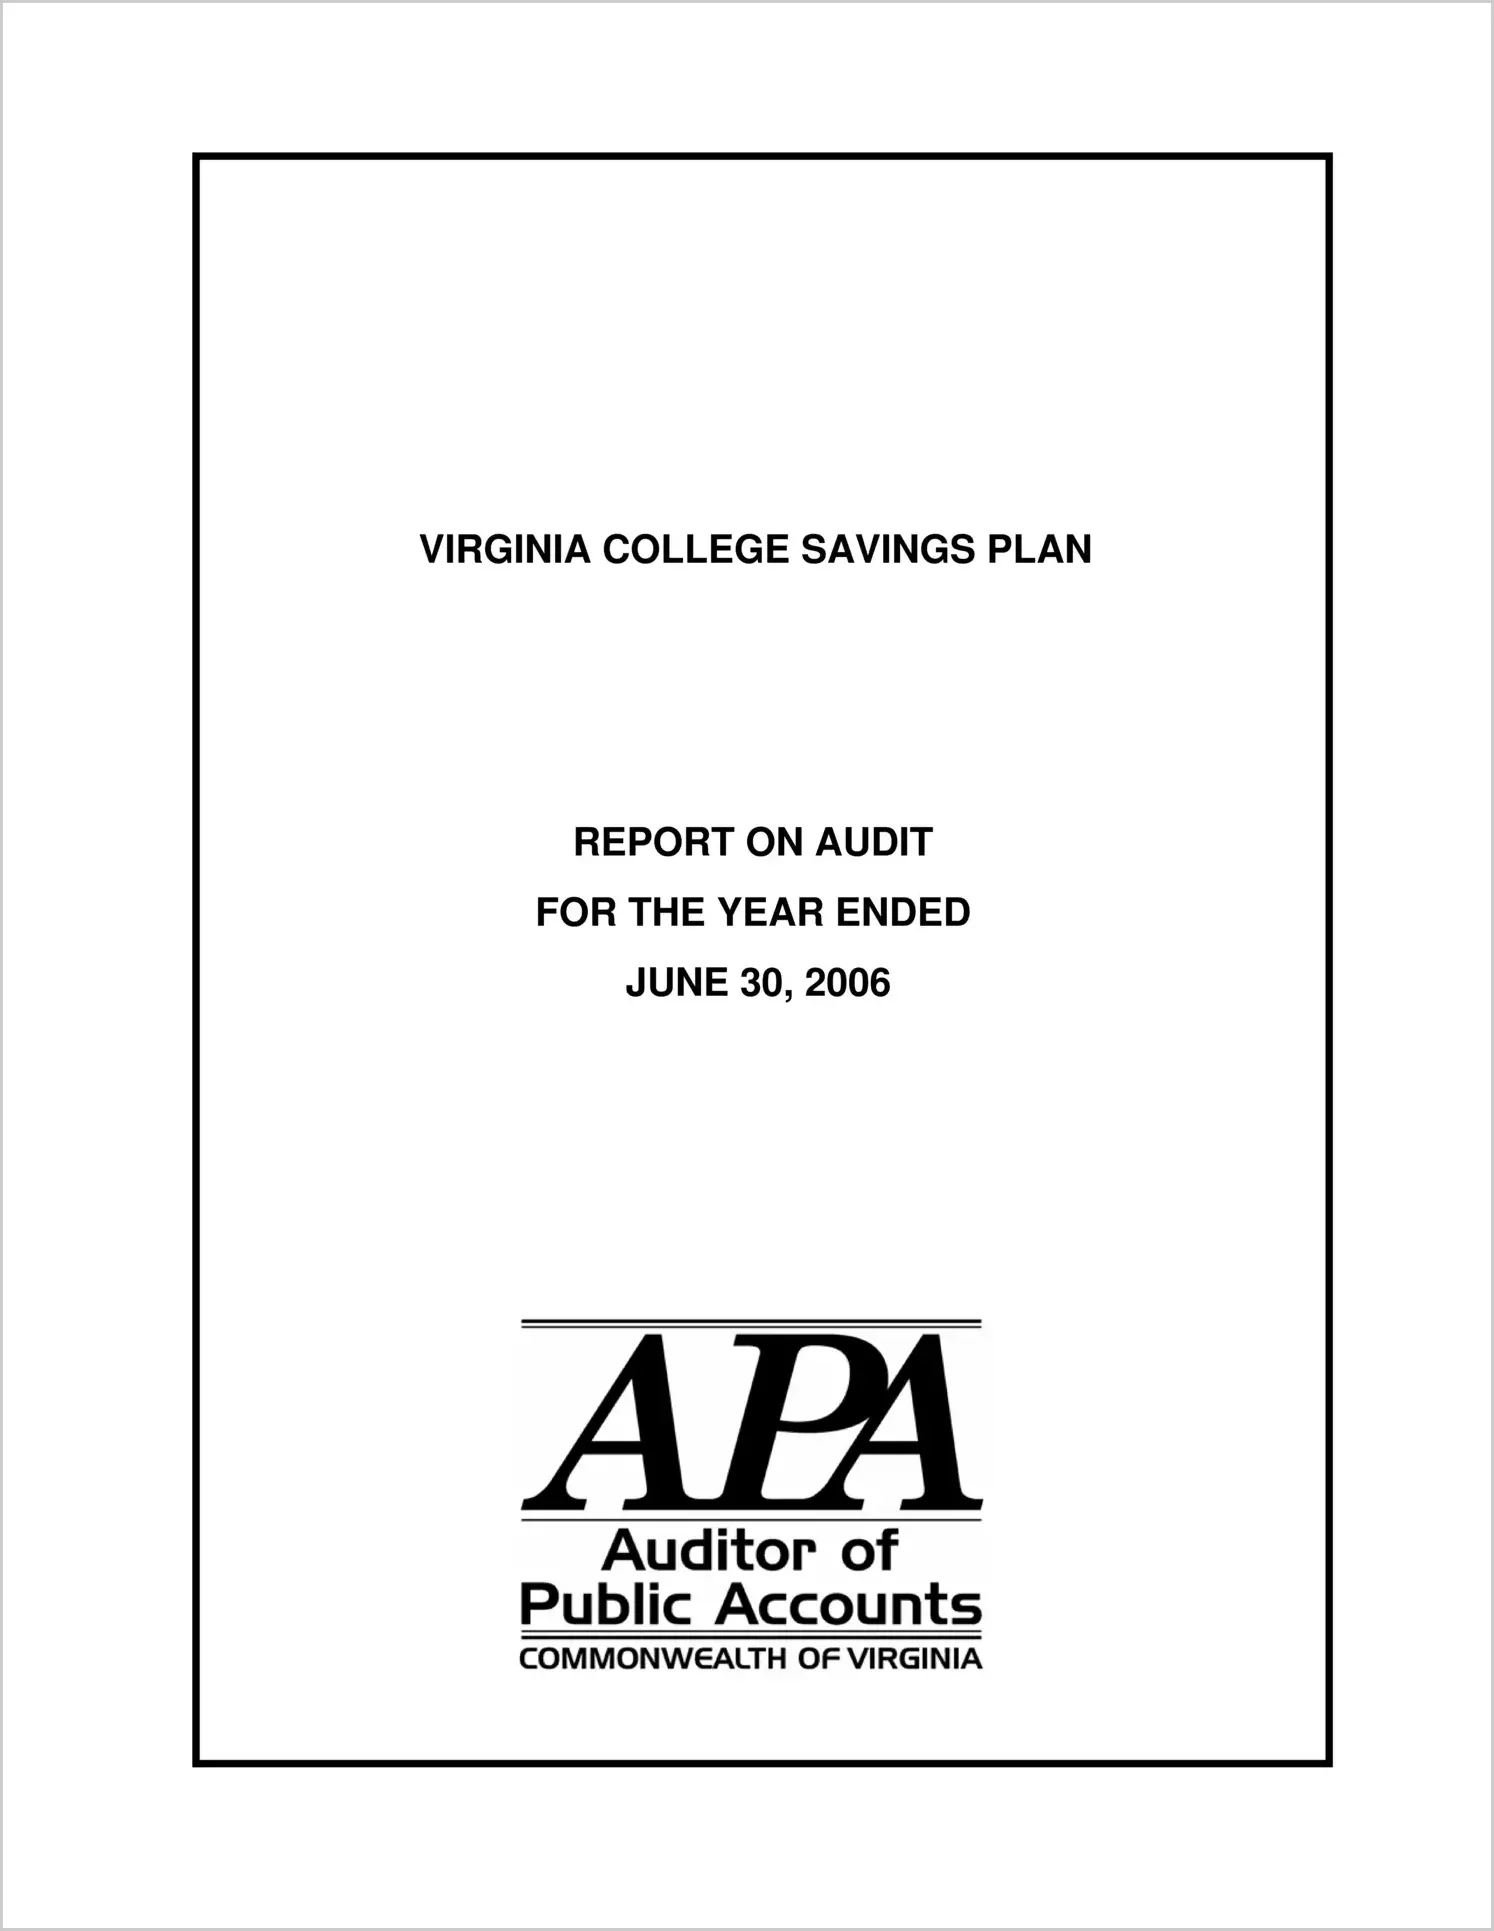 Virginia College Savings Plan for the year ended June 30, 2006